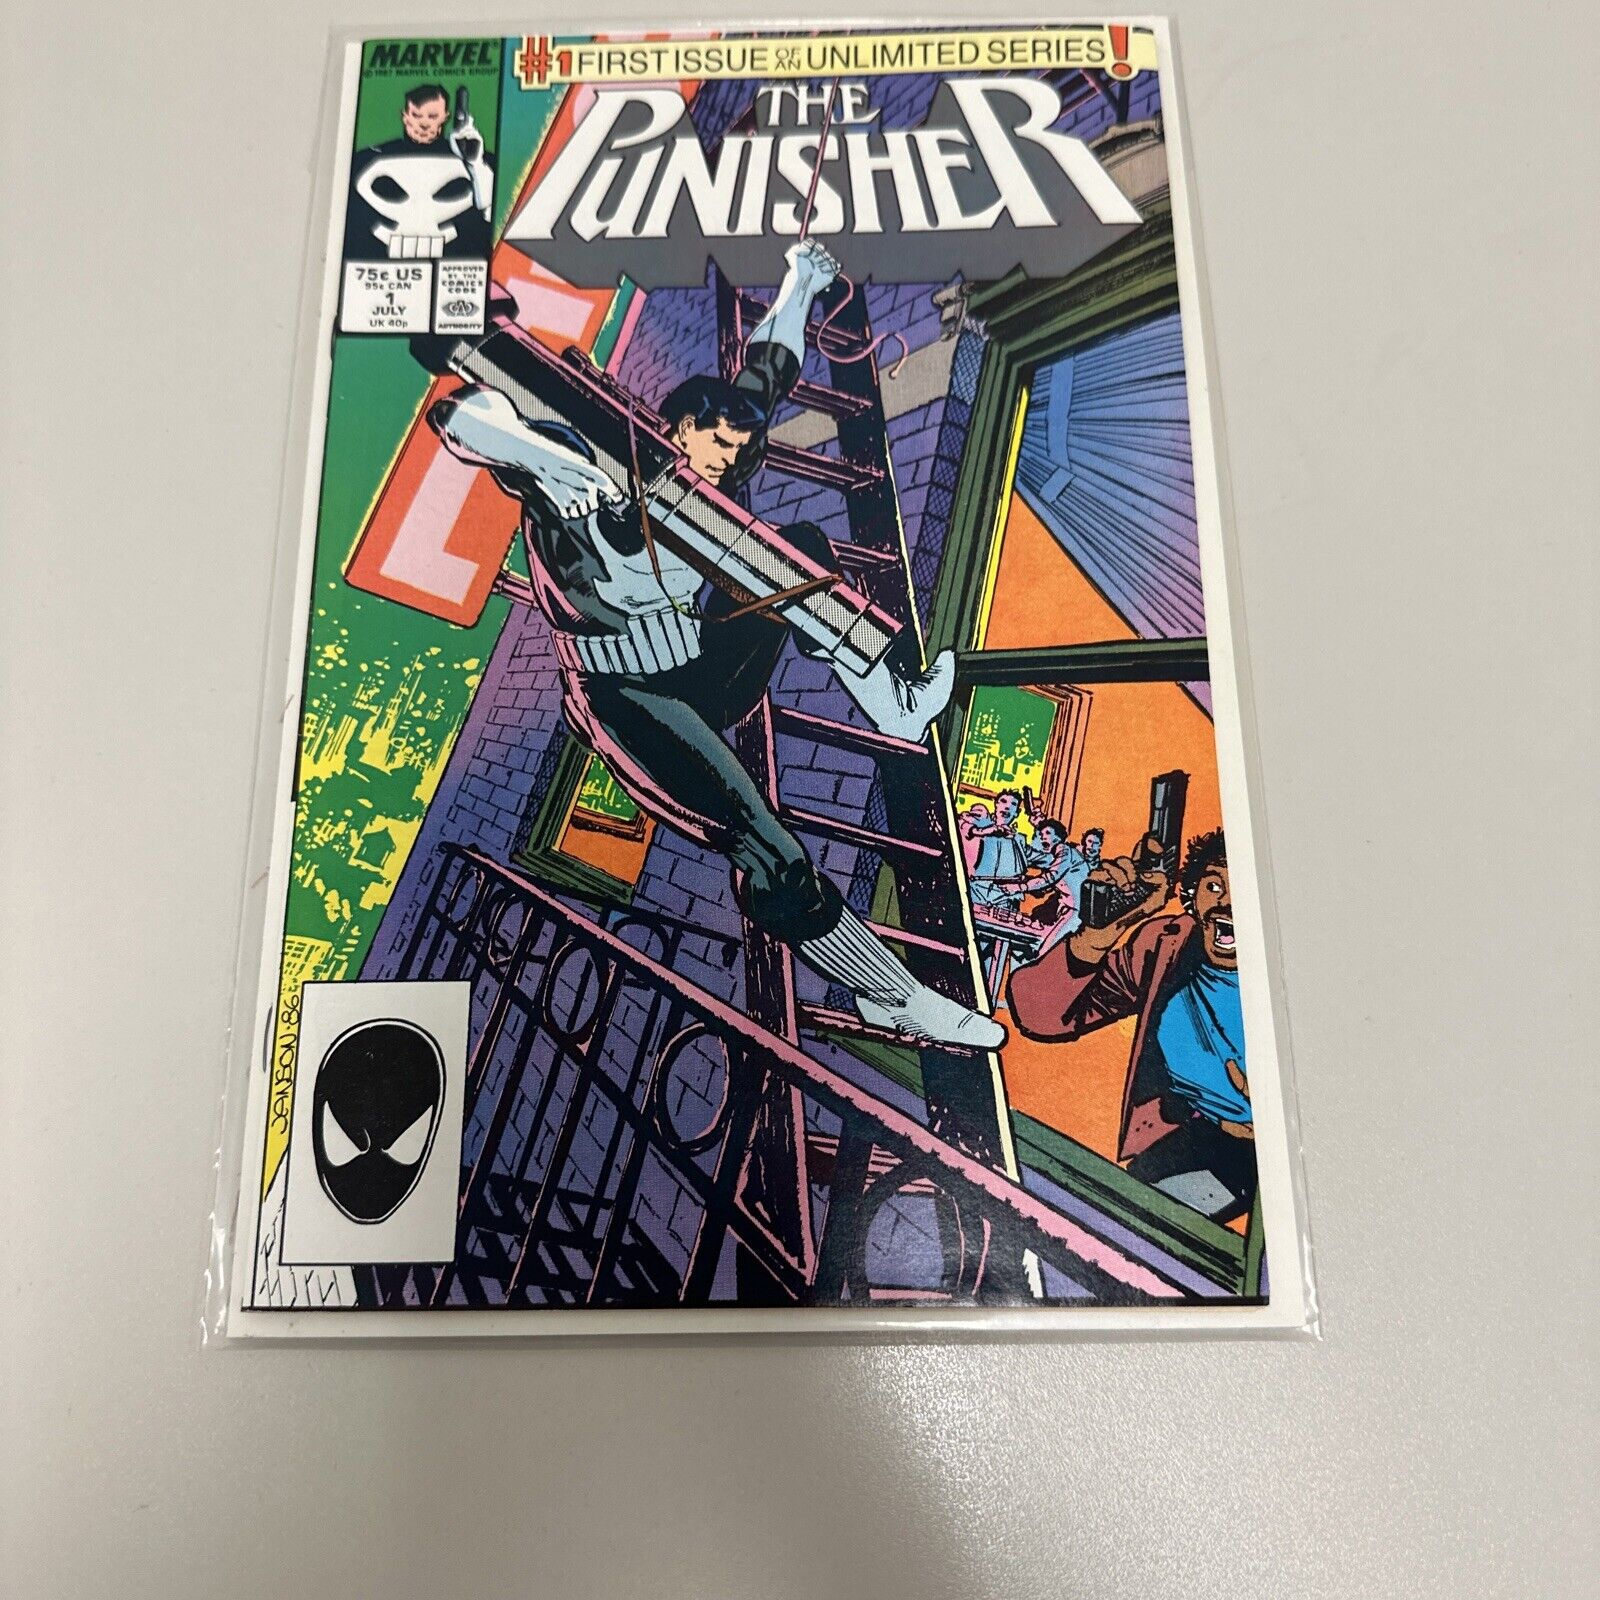 The Punisher #1 Marvel Comics 1st Issue Unlimited Series 1987 Great Condition